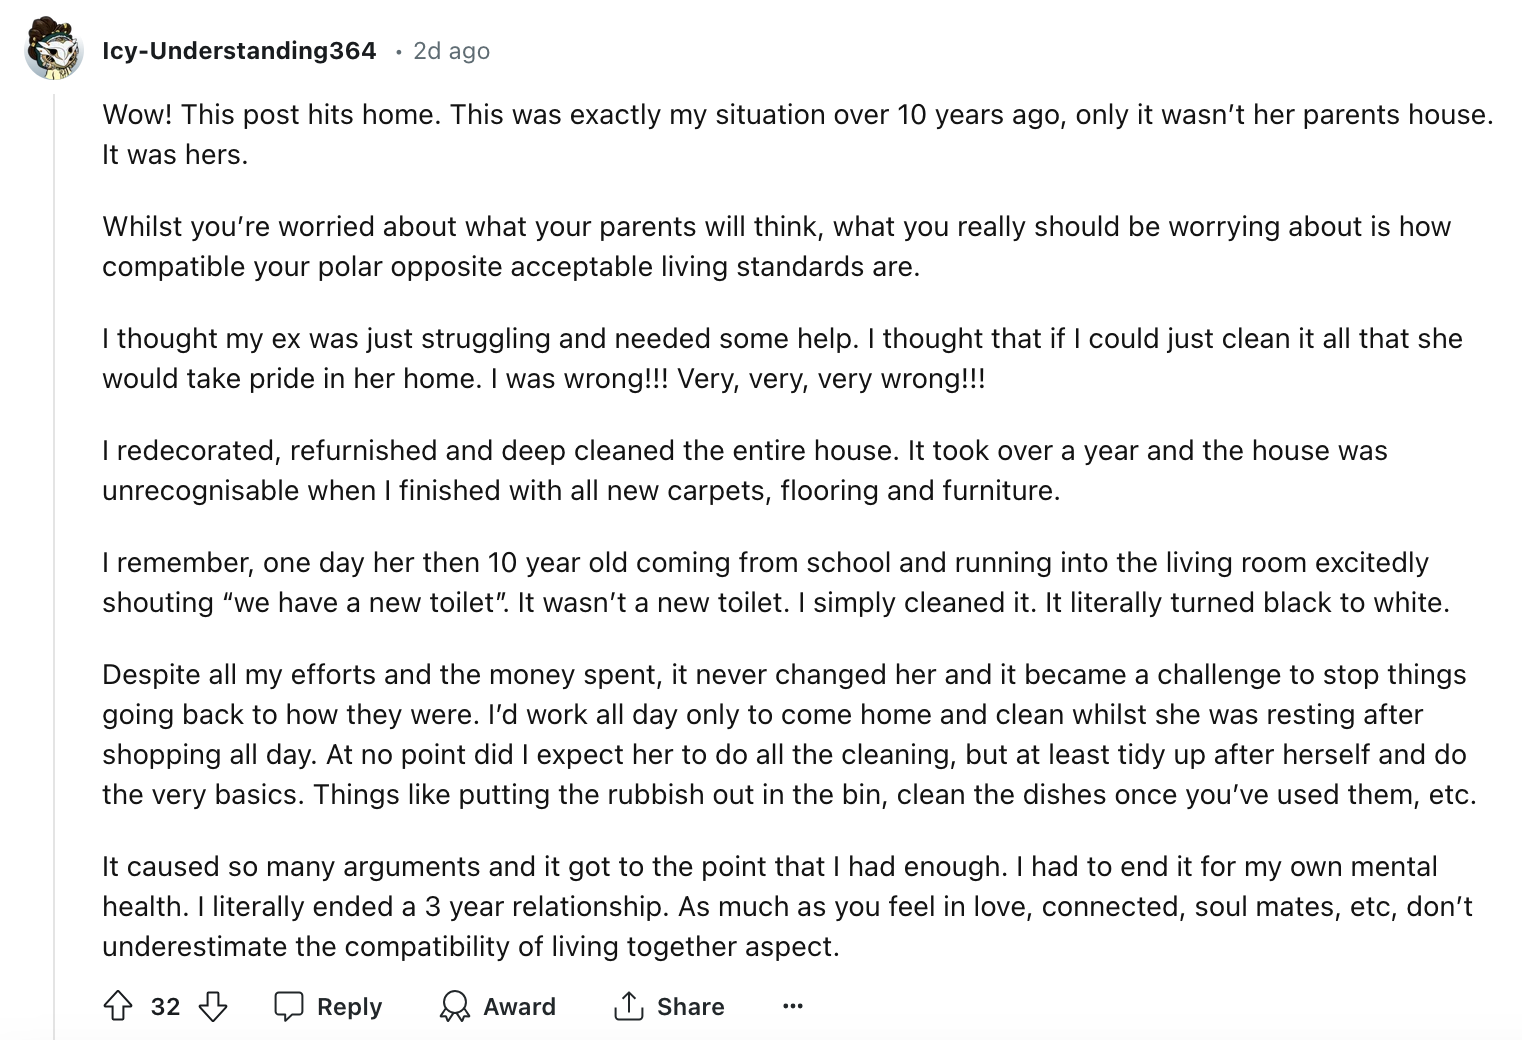 Reddit post from user Icy-Understanding364 discussing their experience living with their parents. They describe challenges and comparisons with a past relationship